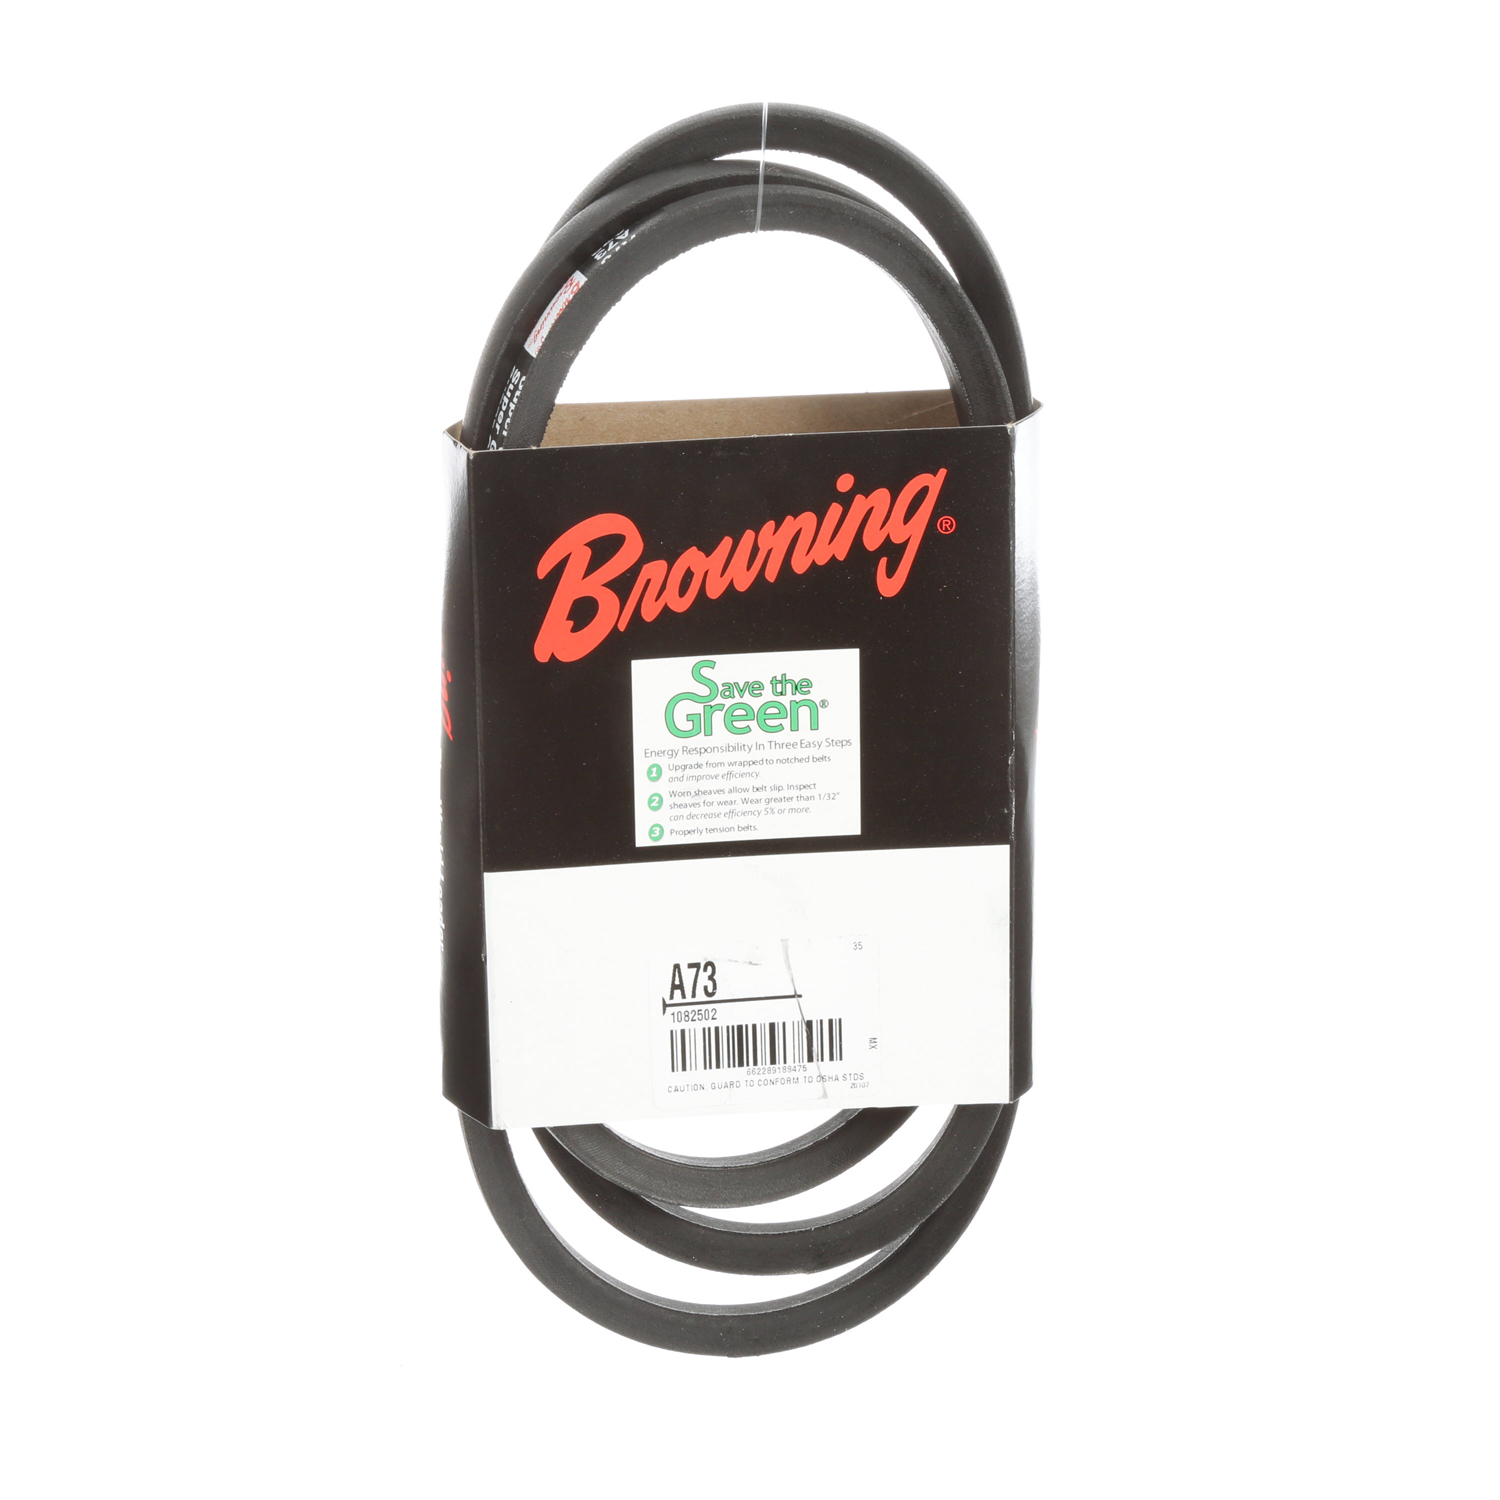 A73 - Browning Super Grip Classic A Section V Belt